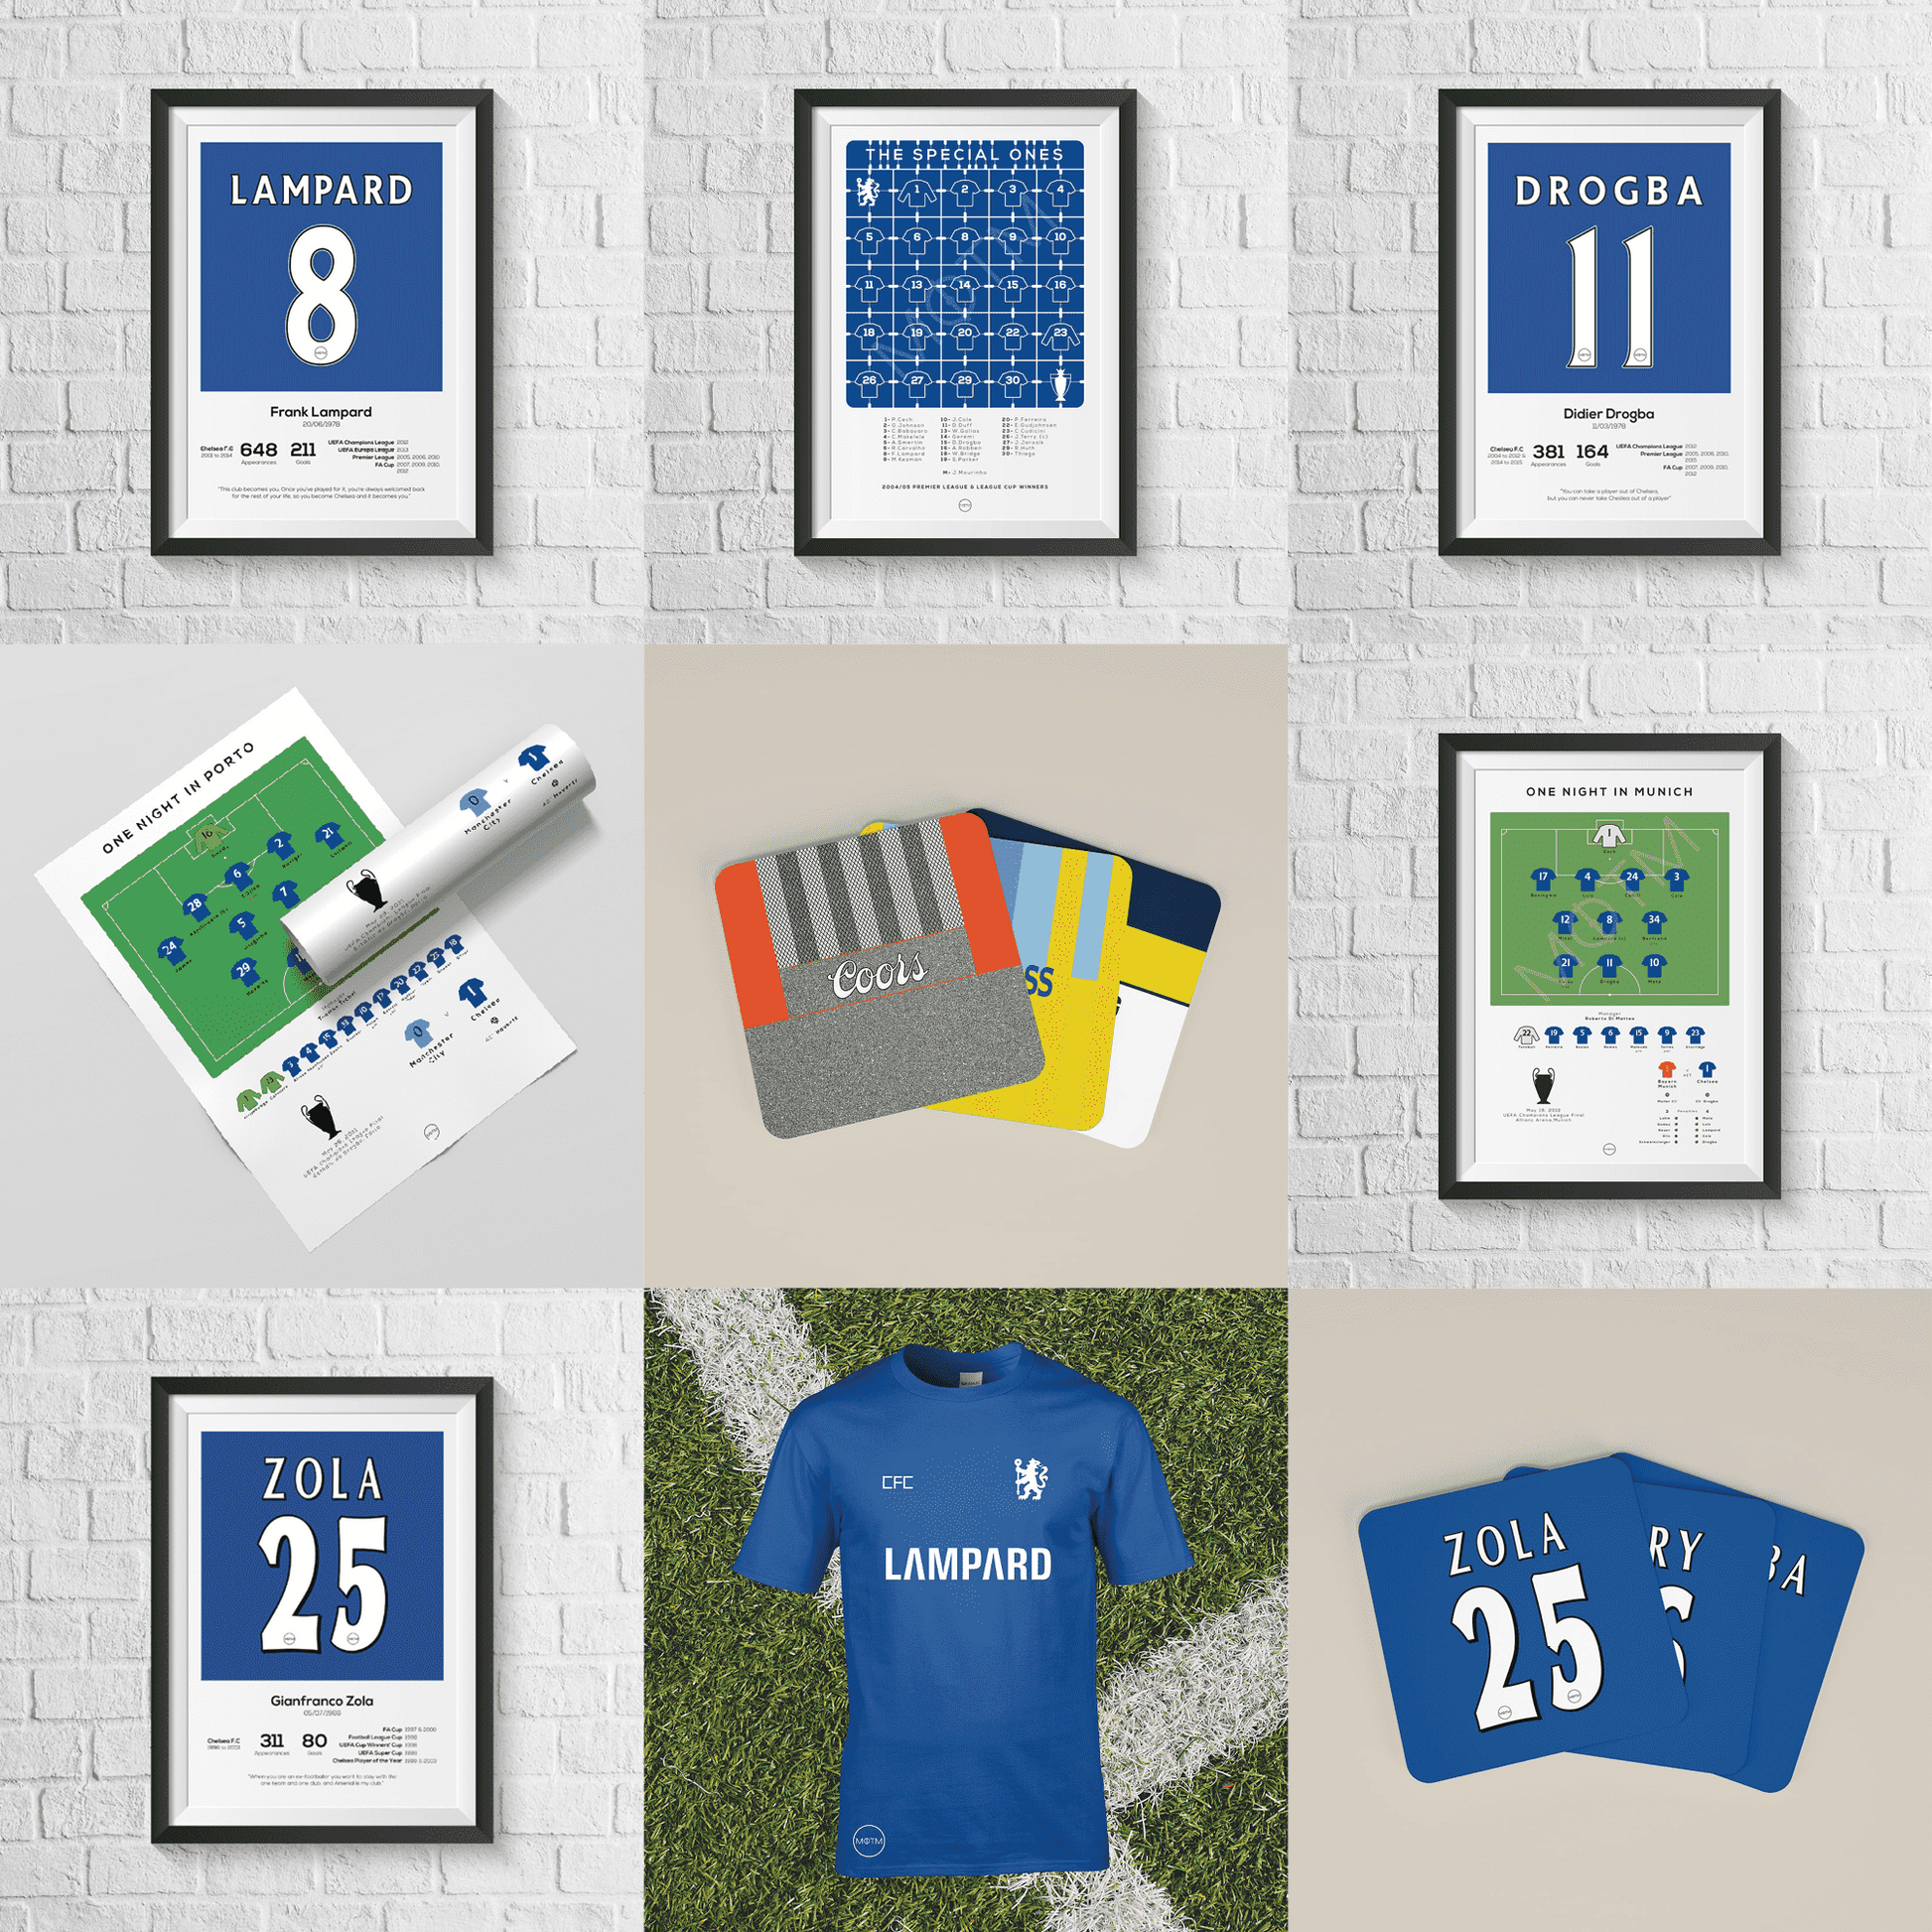 Chelsea vs Manchester City 2021 Champions League Final Print - Man of The Match Football